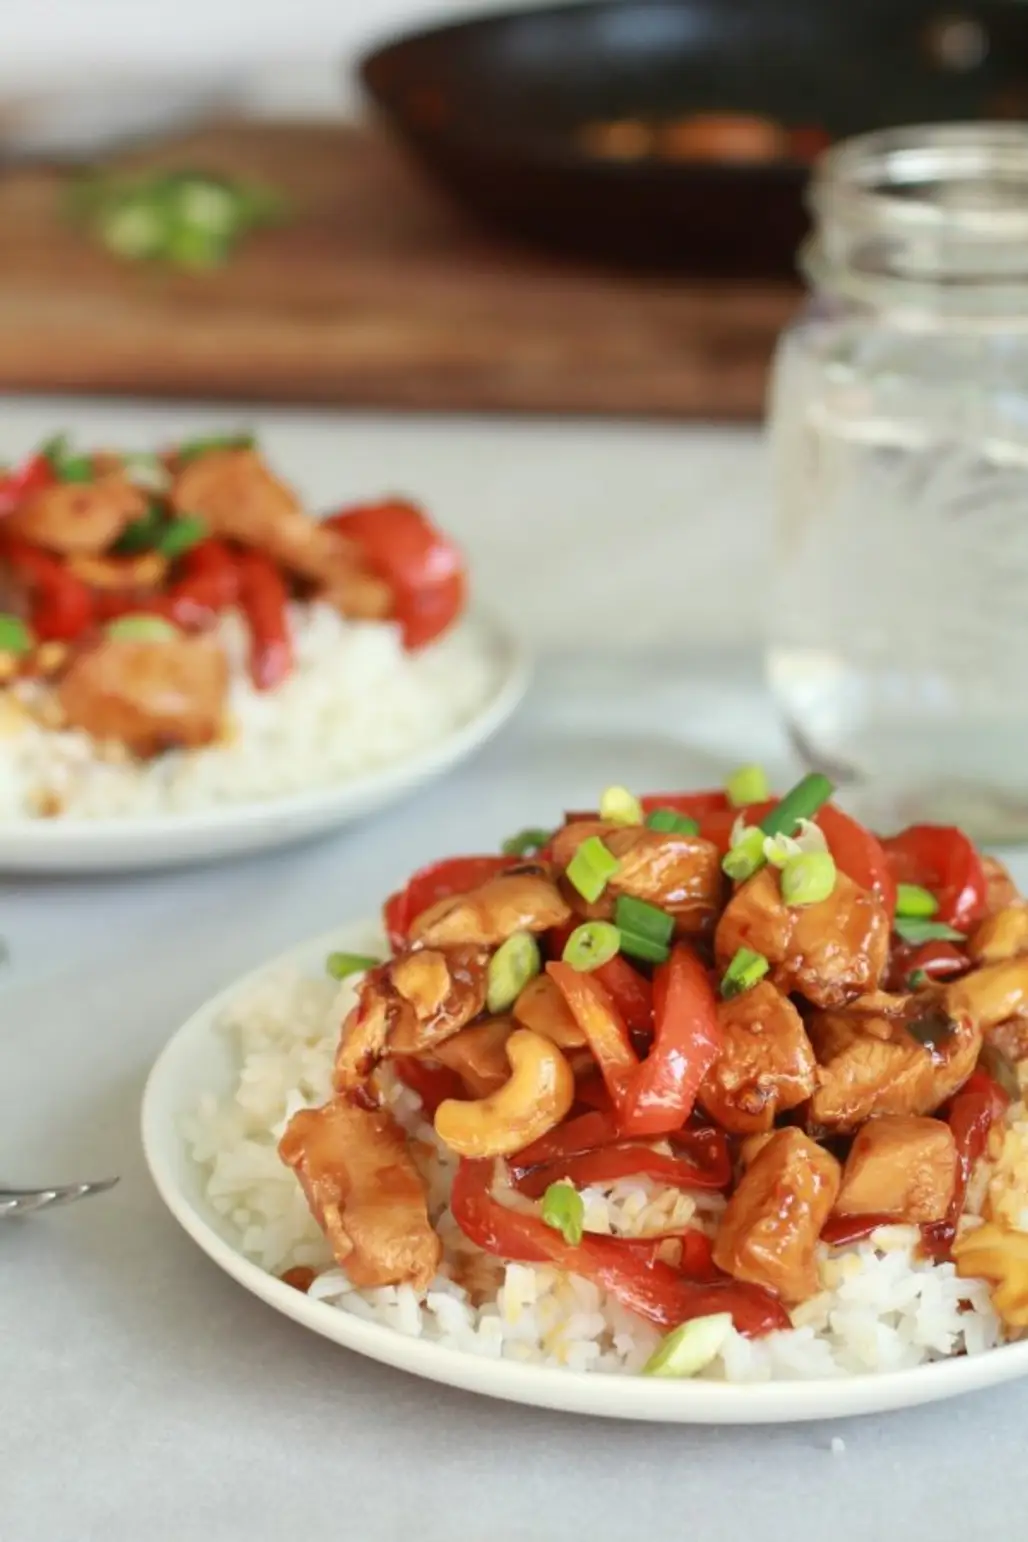 Kung Pao Chicken (or Kung Po)